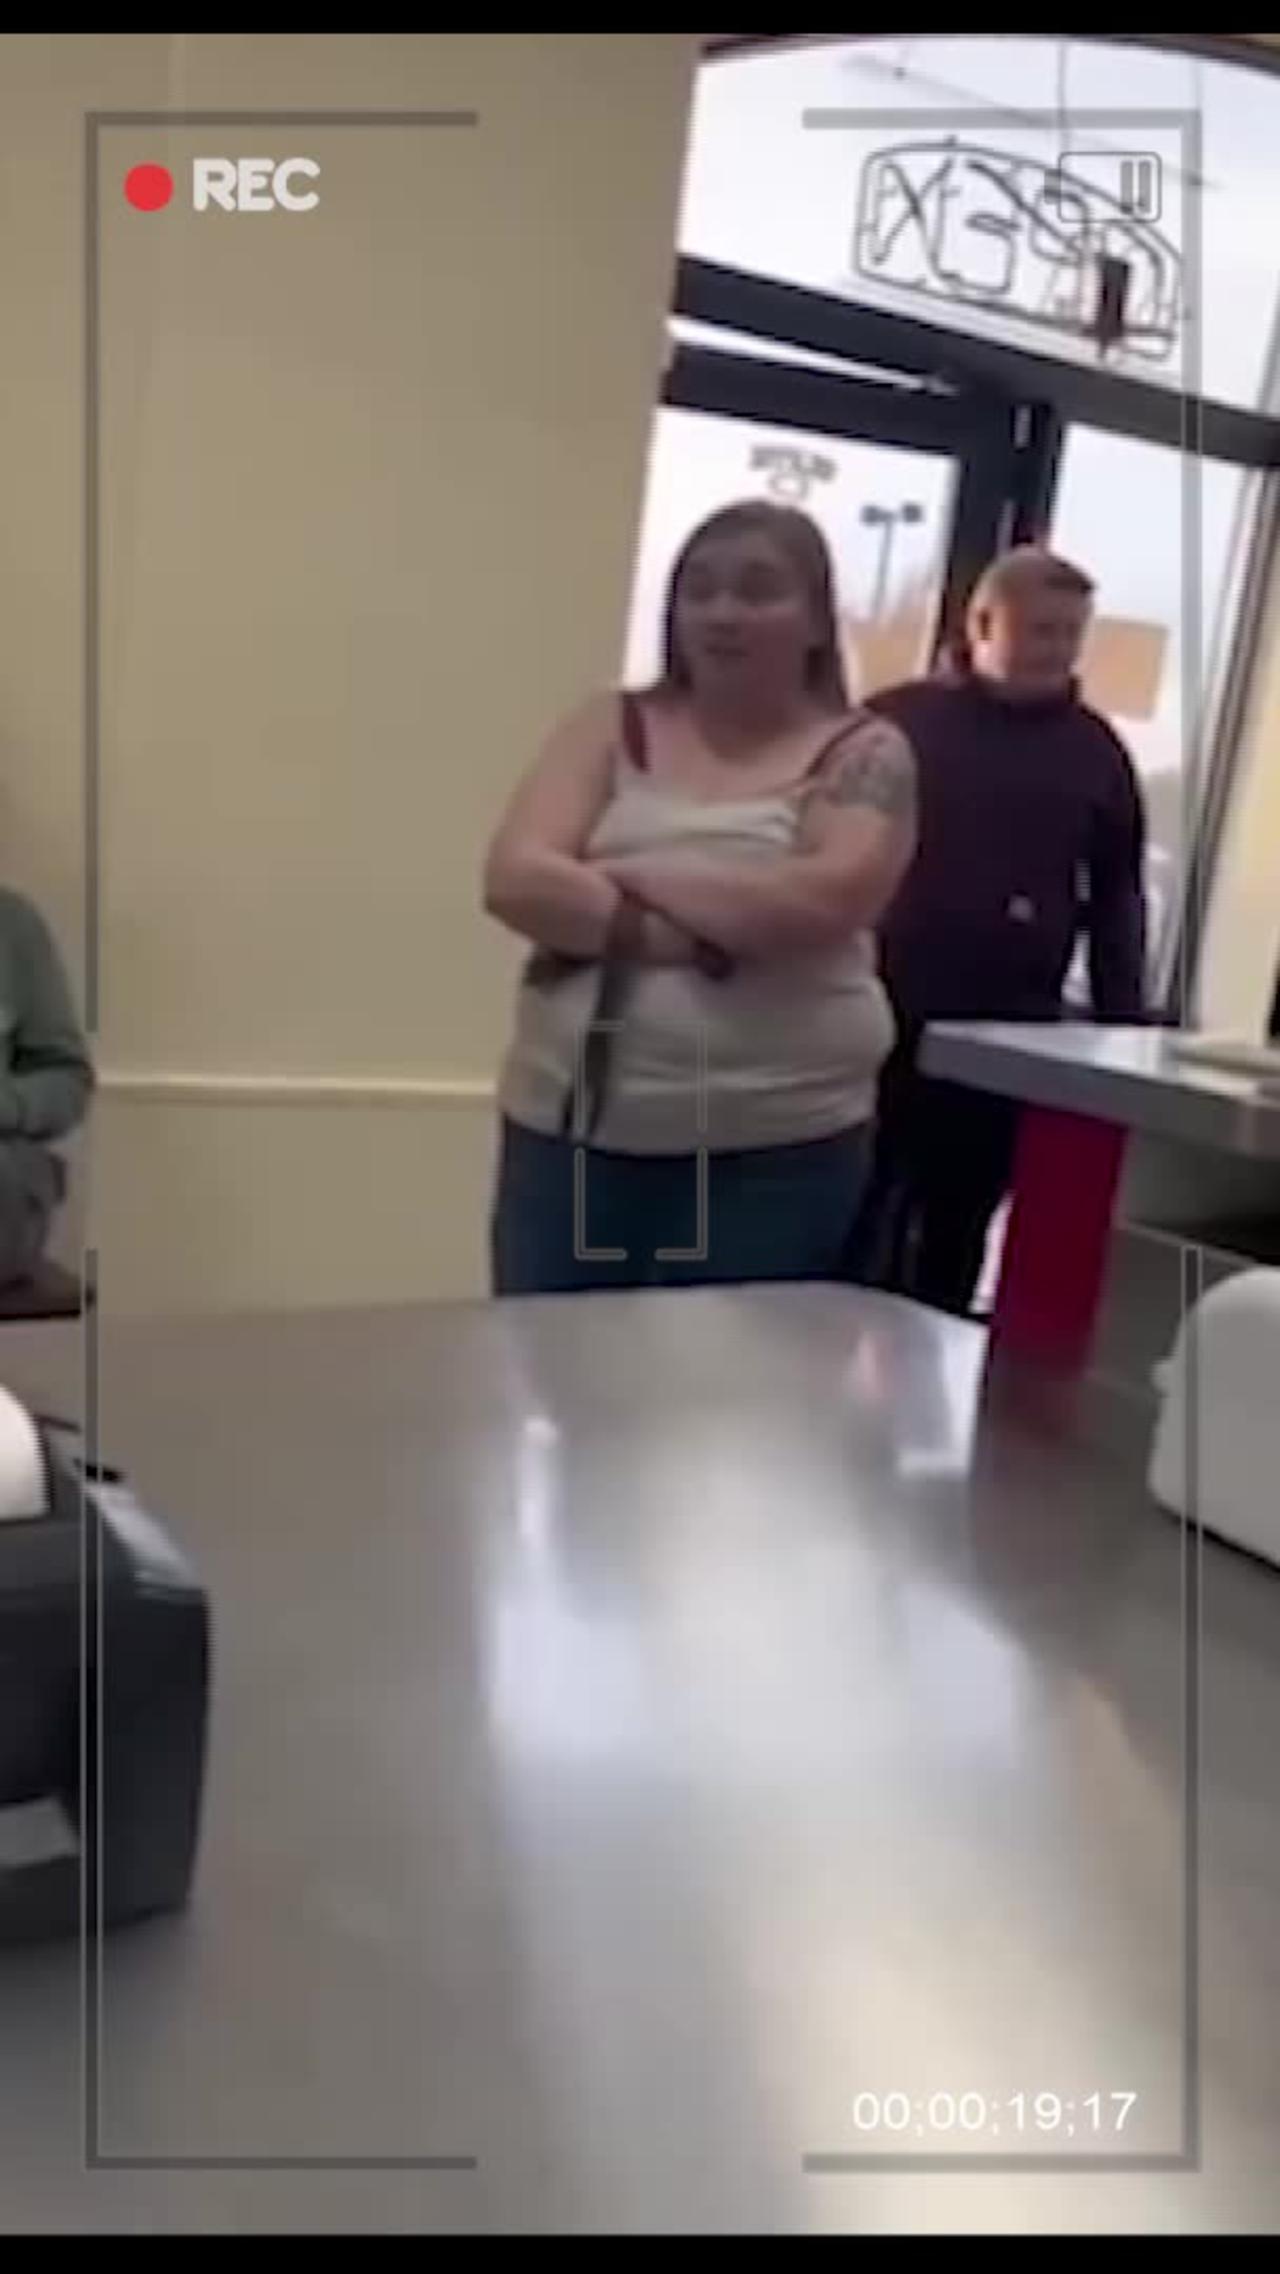 Fast Food Karen is FURIOUS about her pizza order, yells at employees